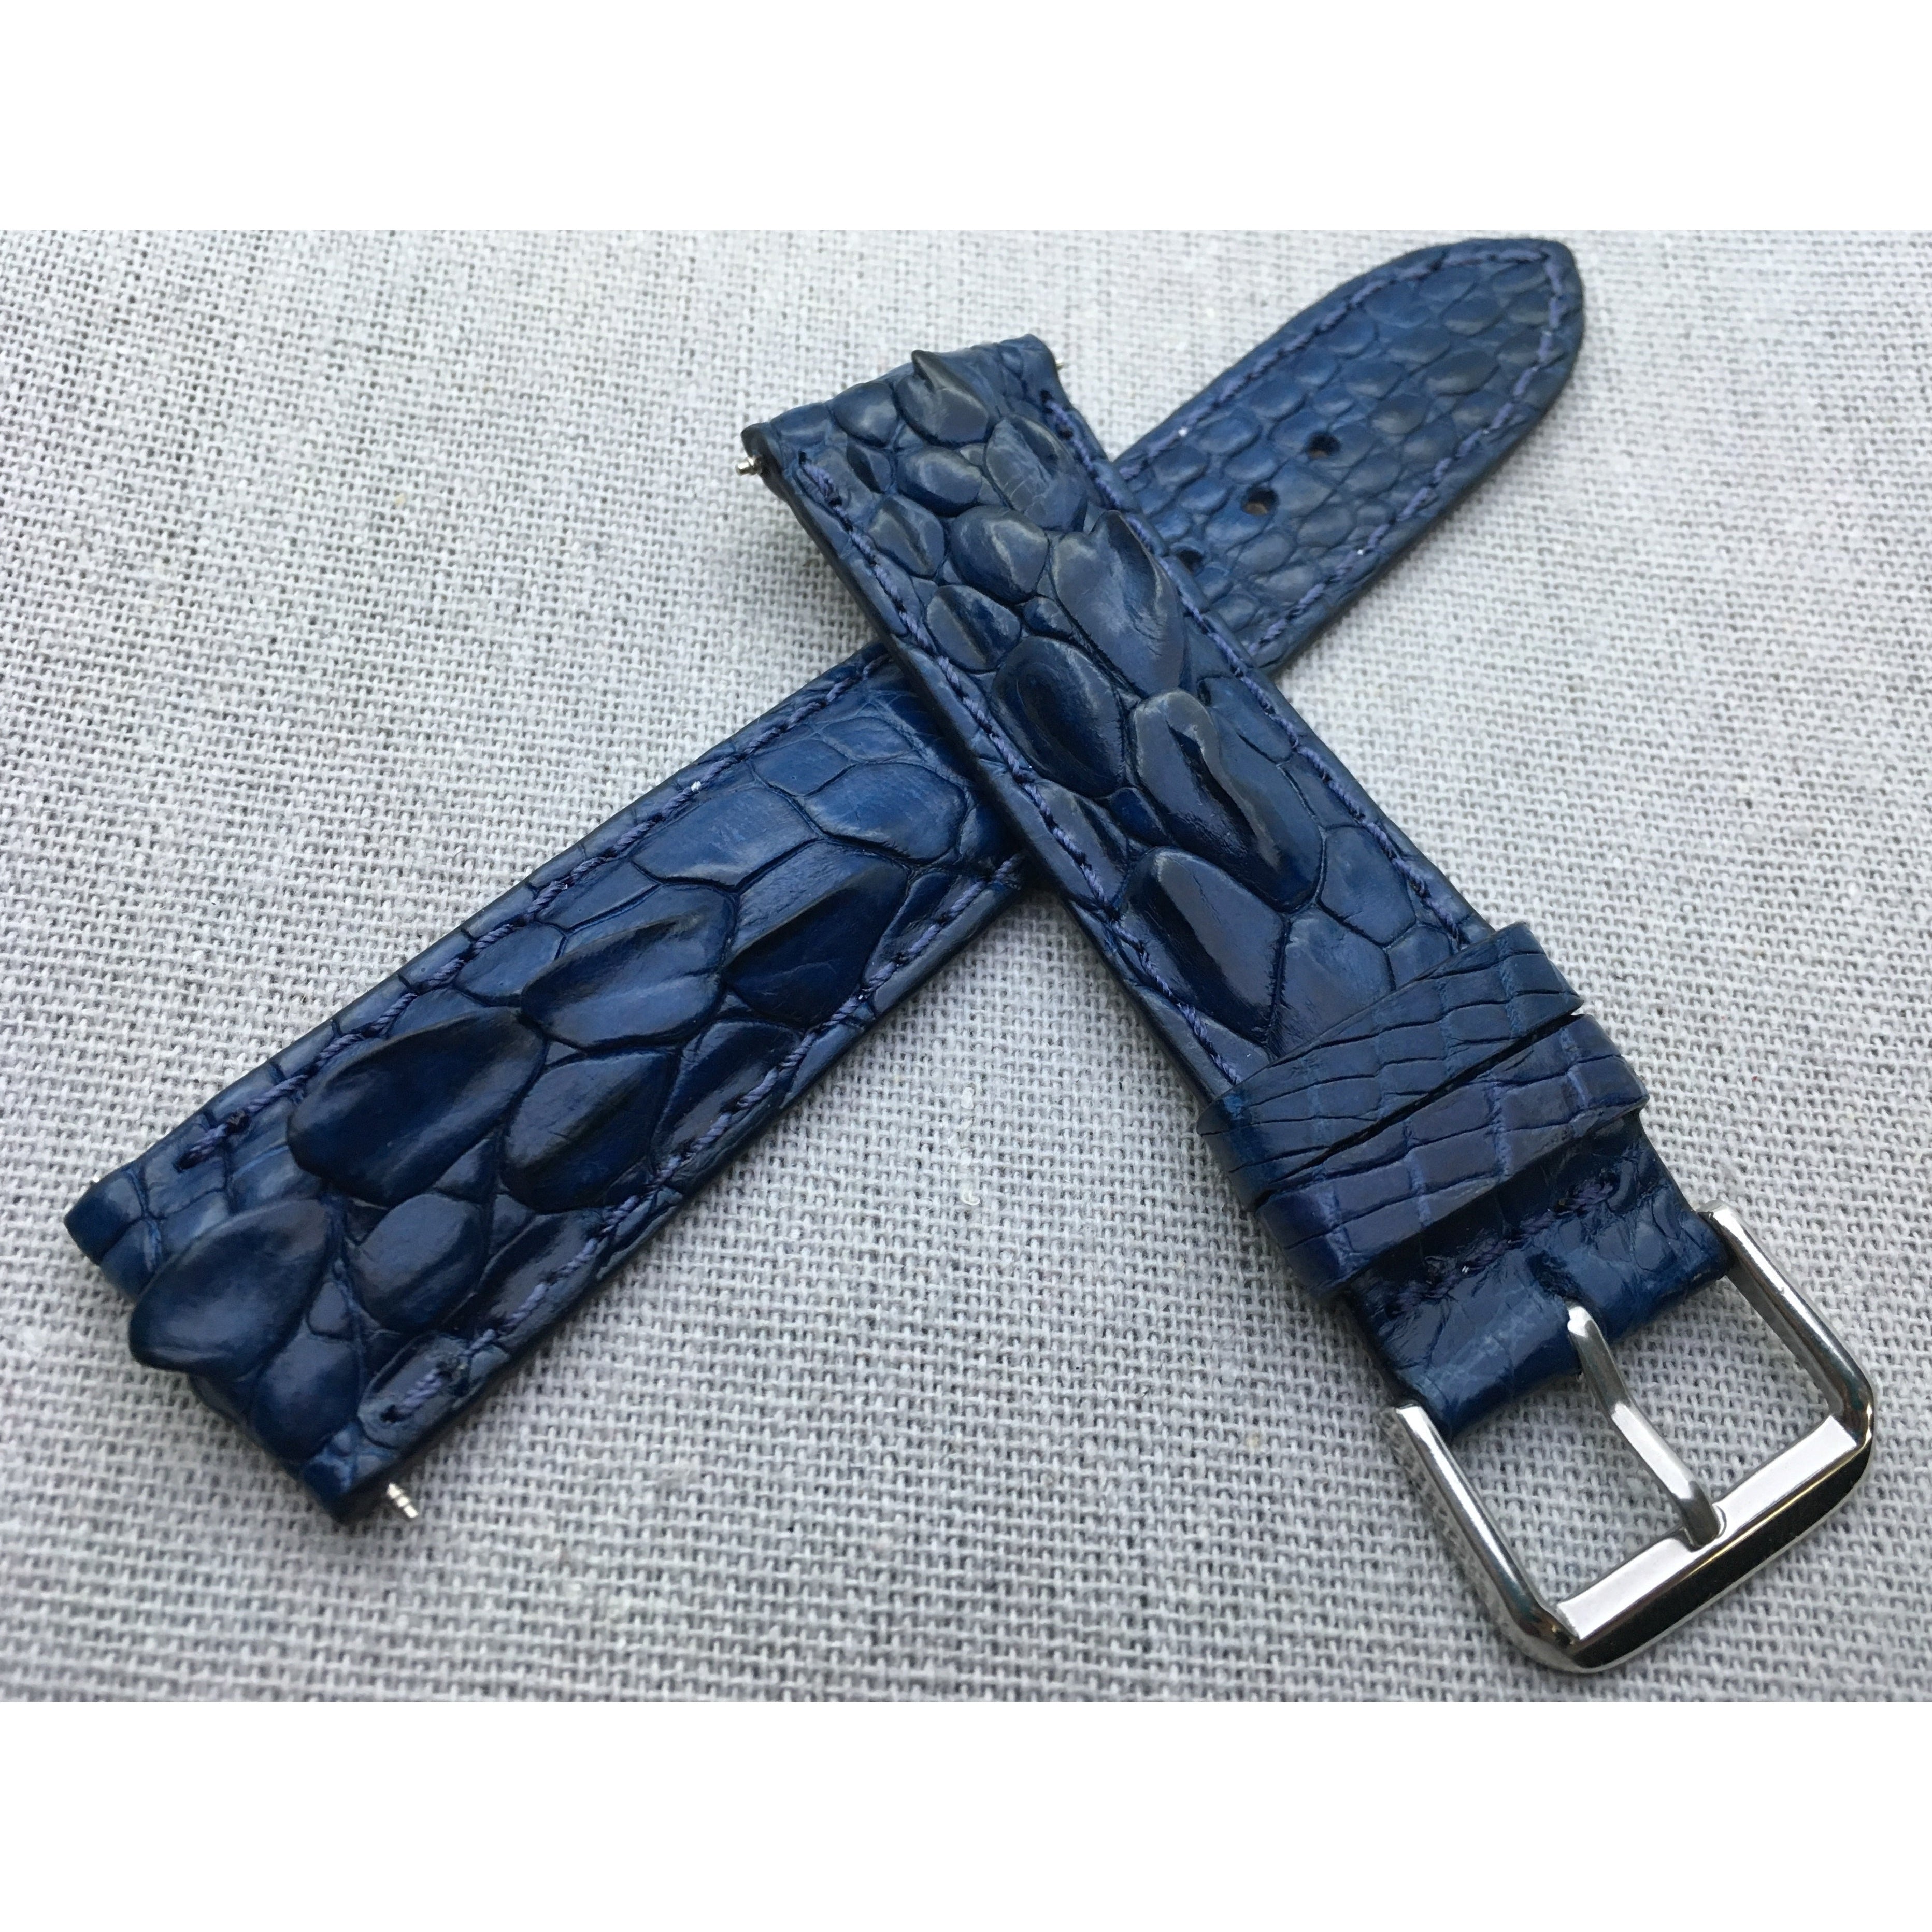 Navy blue Alligator Leather Watch Band For Men | Premium Crocodile Quick Release Replacement Wristwatch Strap | DH-82 - Vinacreations